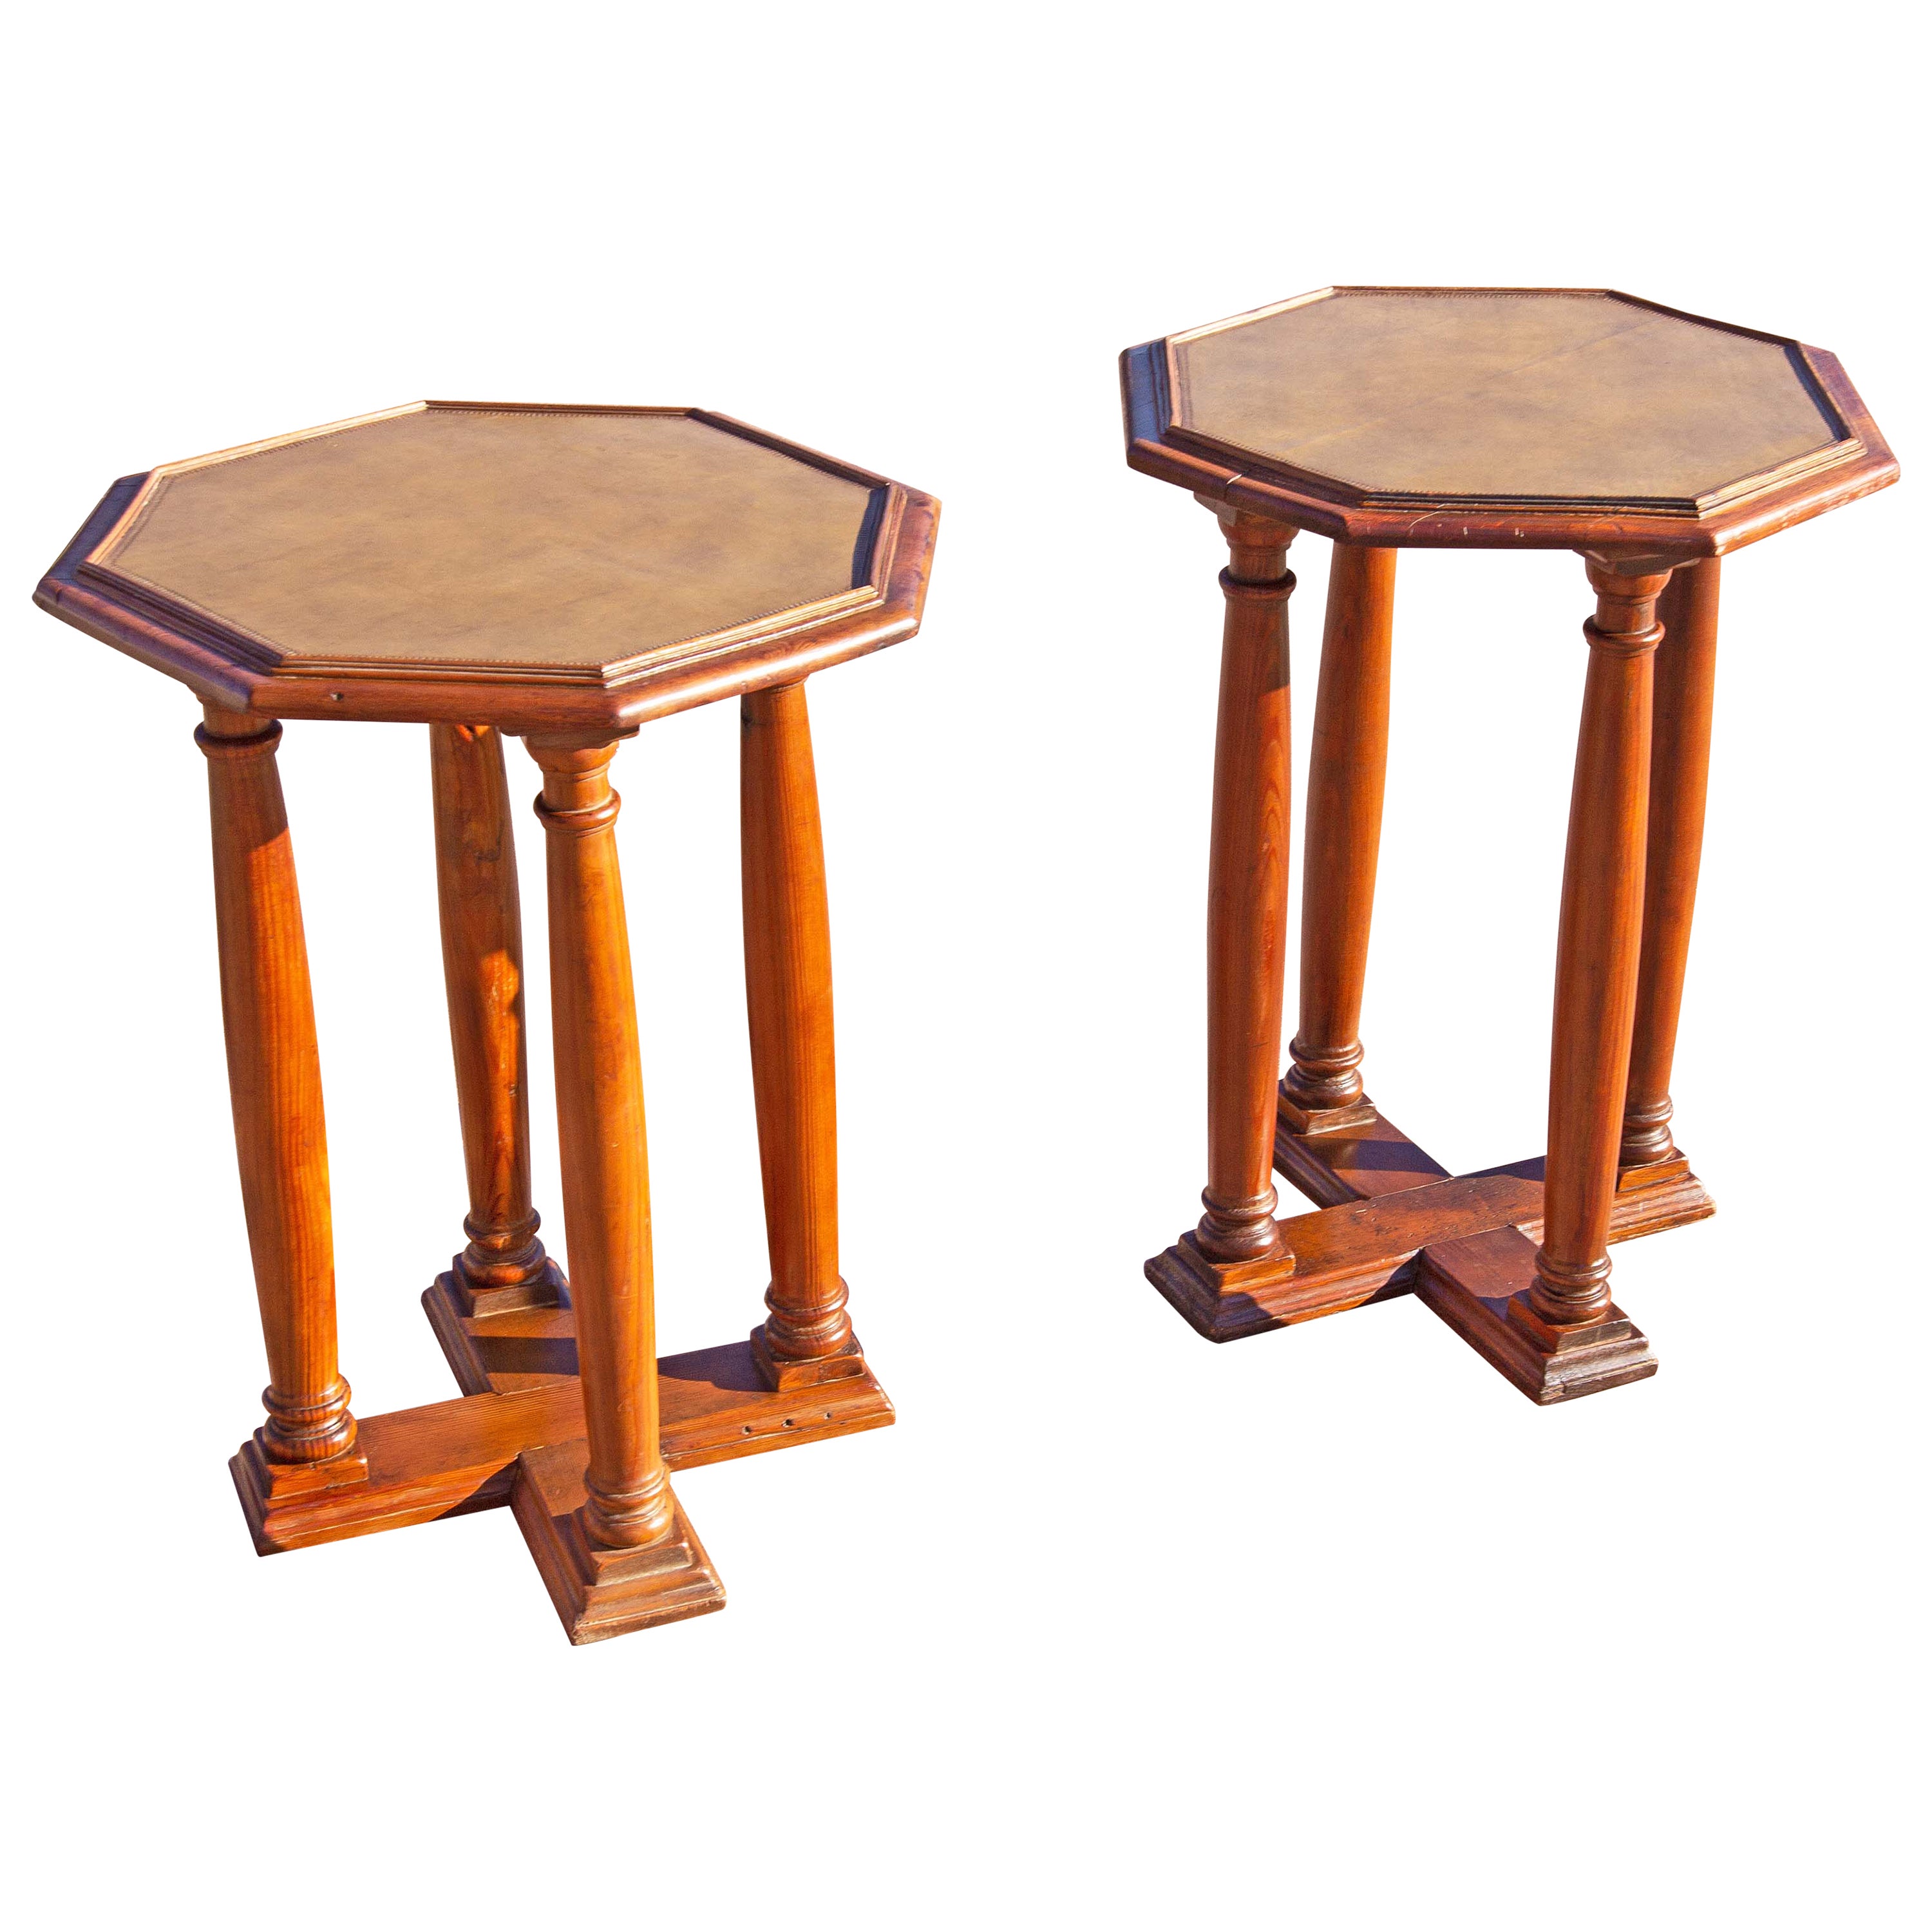 Pair of Leather Top Italian Tuscan Tables 19th Century